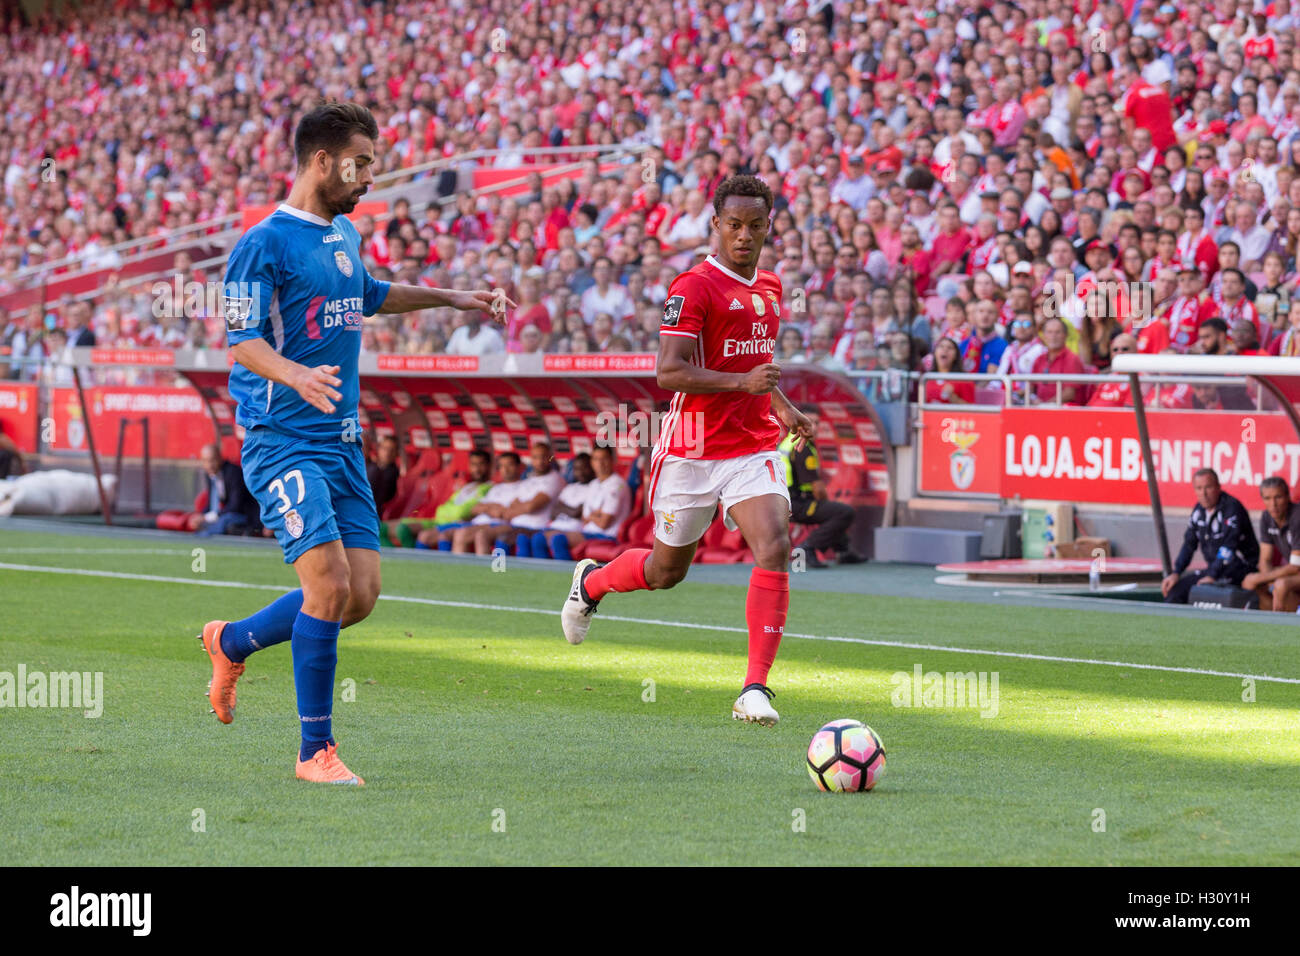 Lisbon, Portugal. 2 Oct, 2016. SL Benfica's Peruvian forward Andre Carrillo (15) and Feirense's Portuguese defender Paulo Monteiro (37) in action during the game SL Benfica vs GD Feirense Credit:  Alexandre de Sousa/Alamy Live News Stock Photo